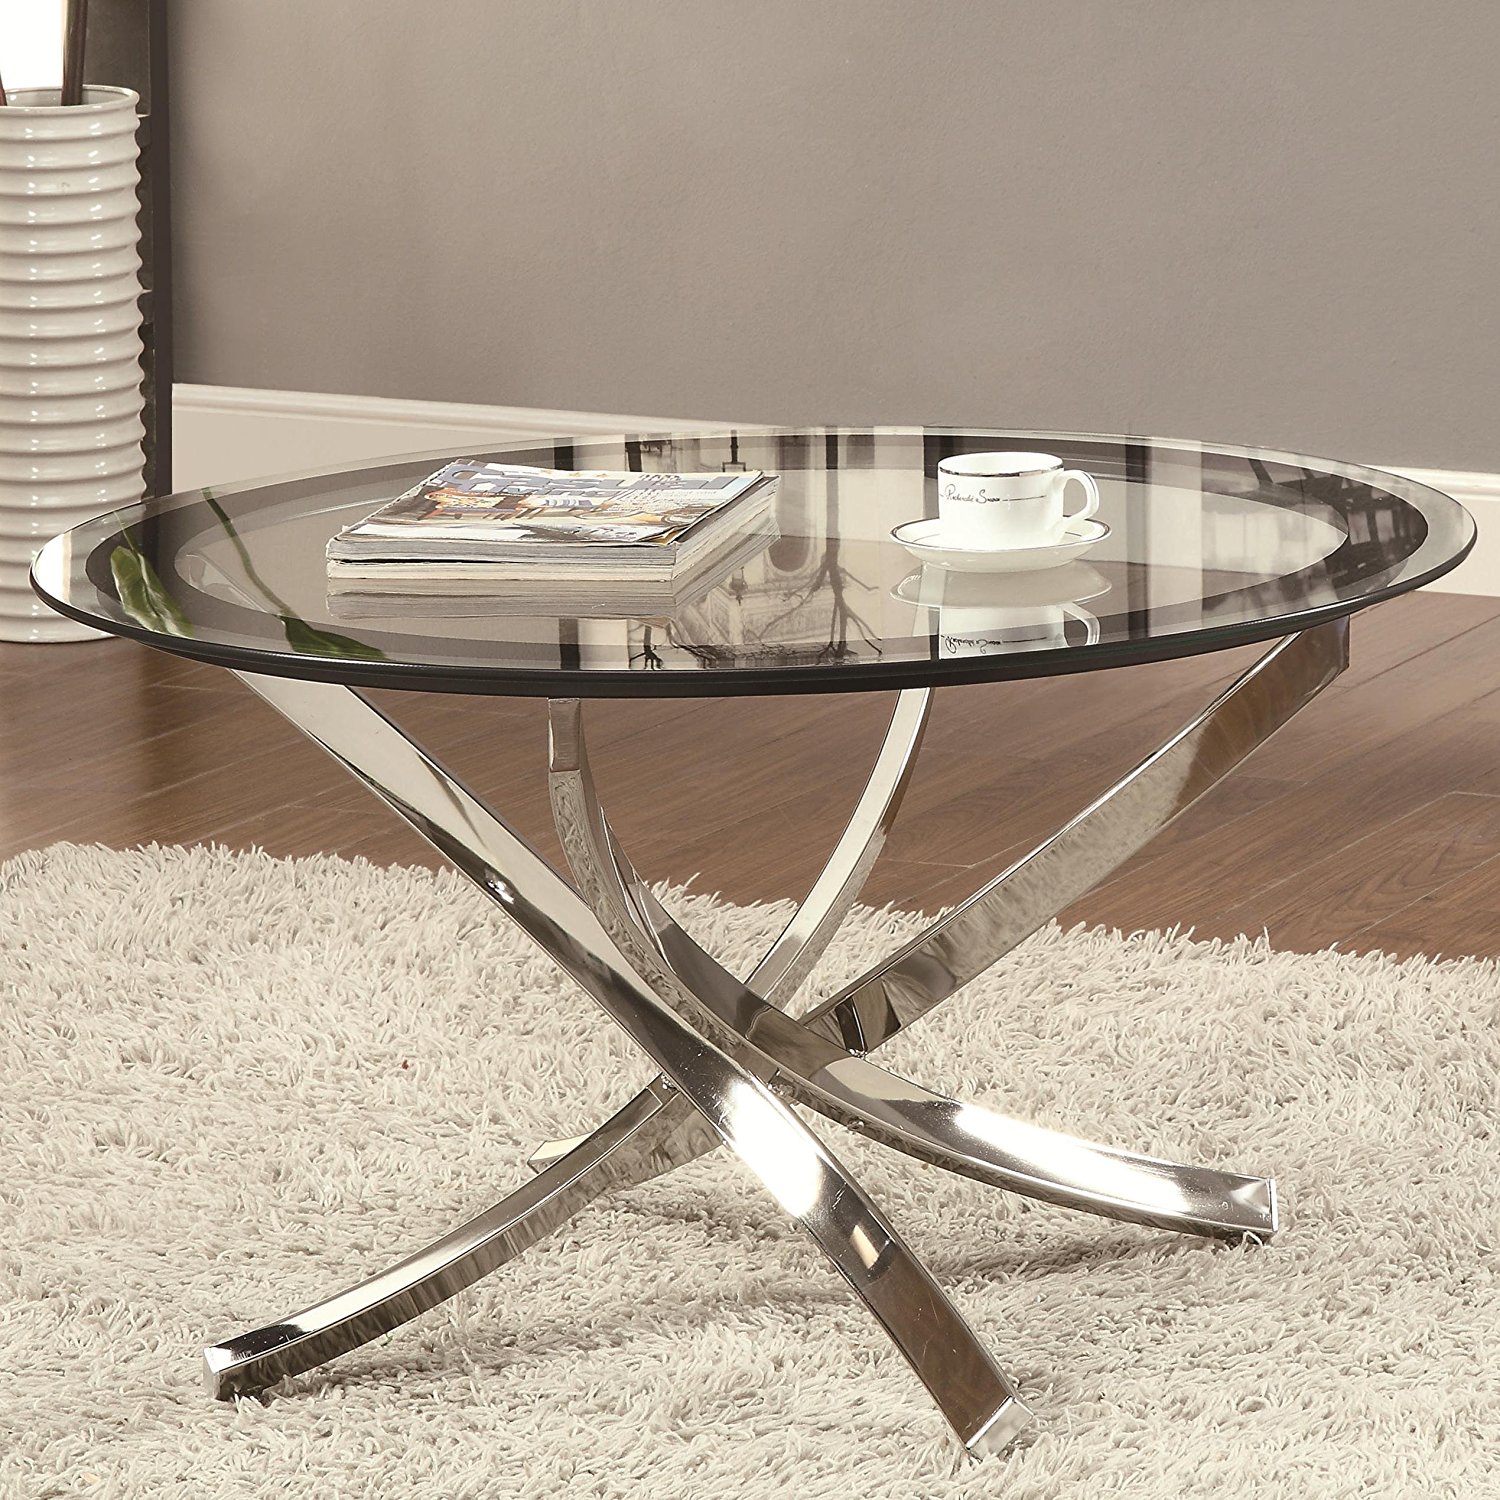 extra small end tables probably super best black metal glass coffee round top table with base square inch lamps resin wicker chairs pallet and coin operated washing machine single